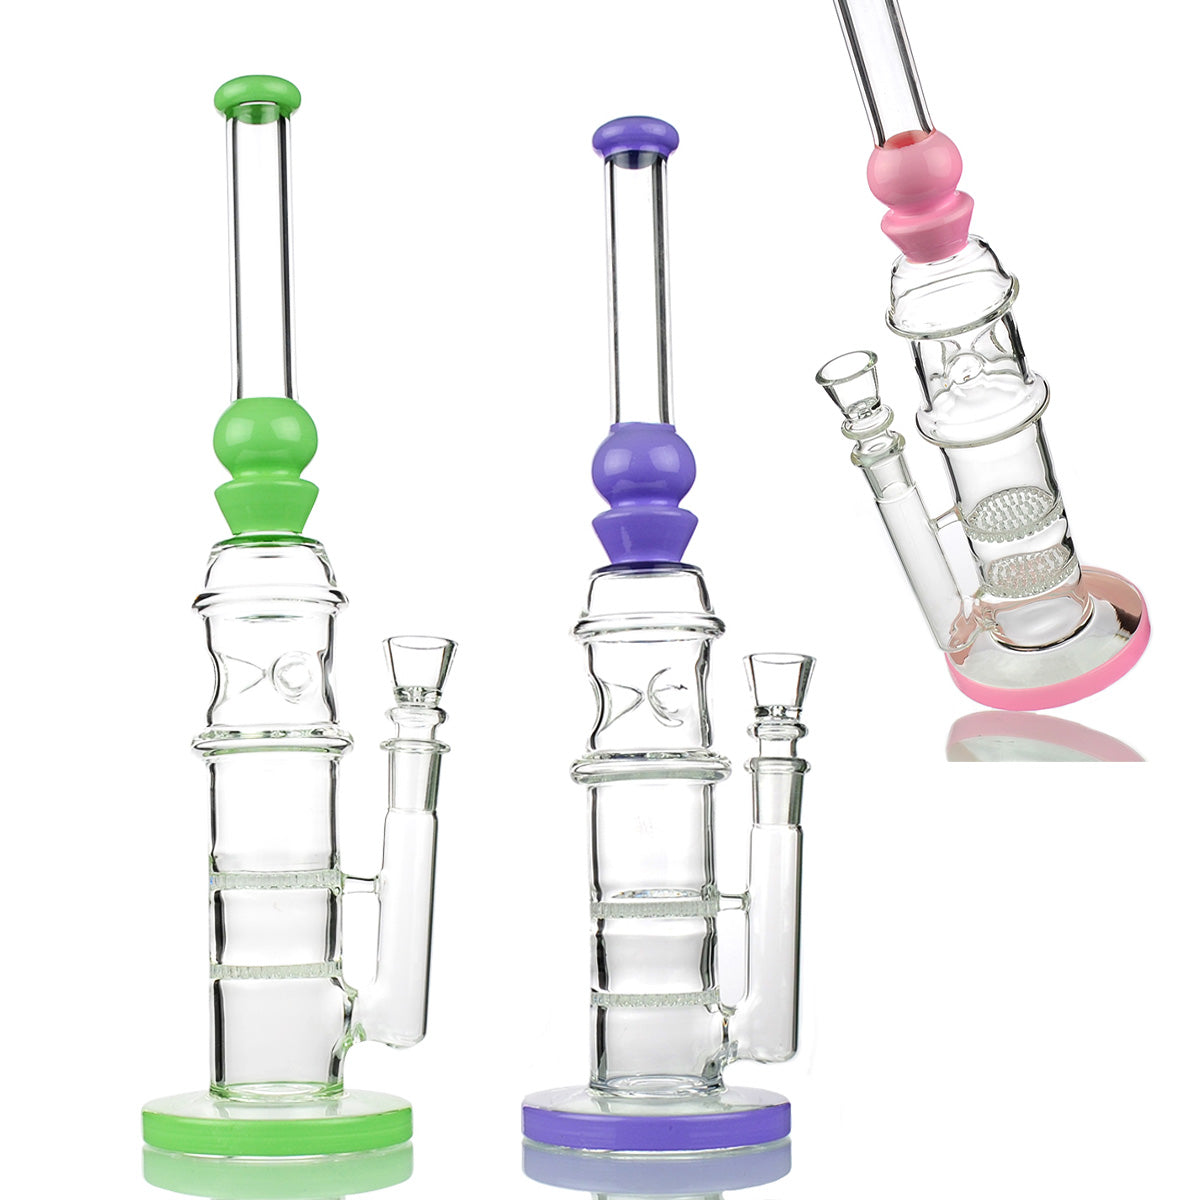 16'' Double Honeycomb Hand Painted Slime Color Bong with 18mm Male Bowl